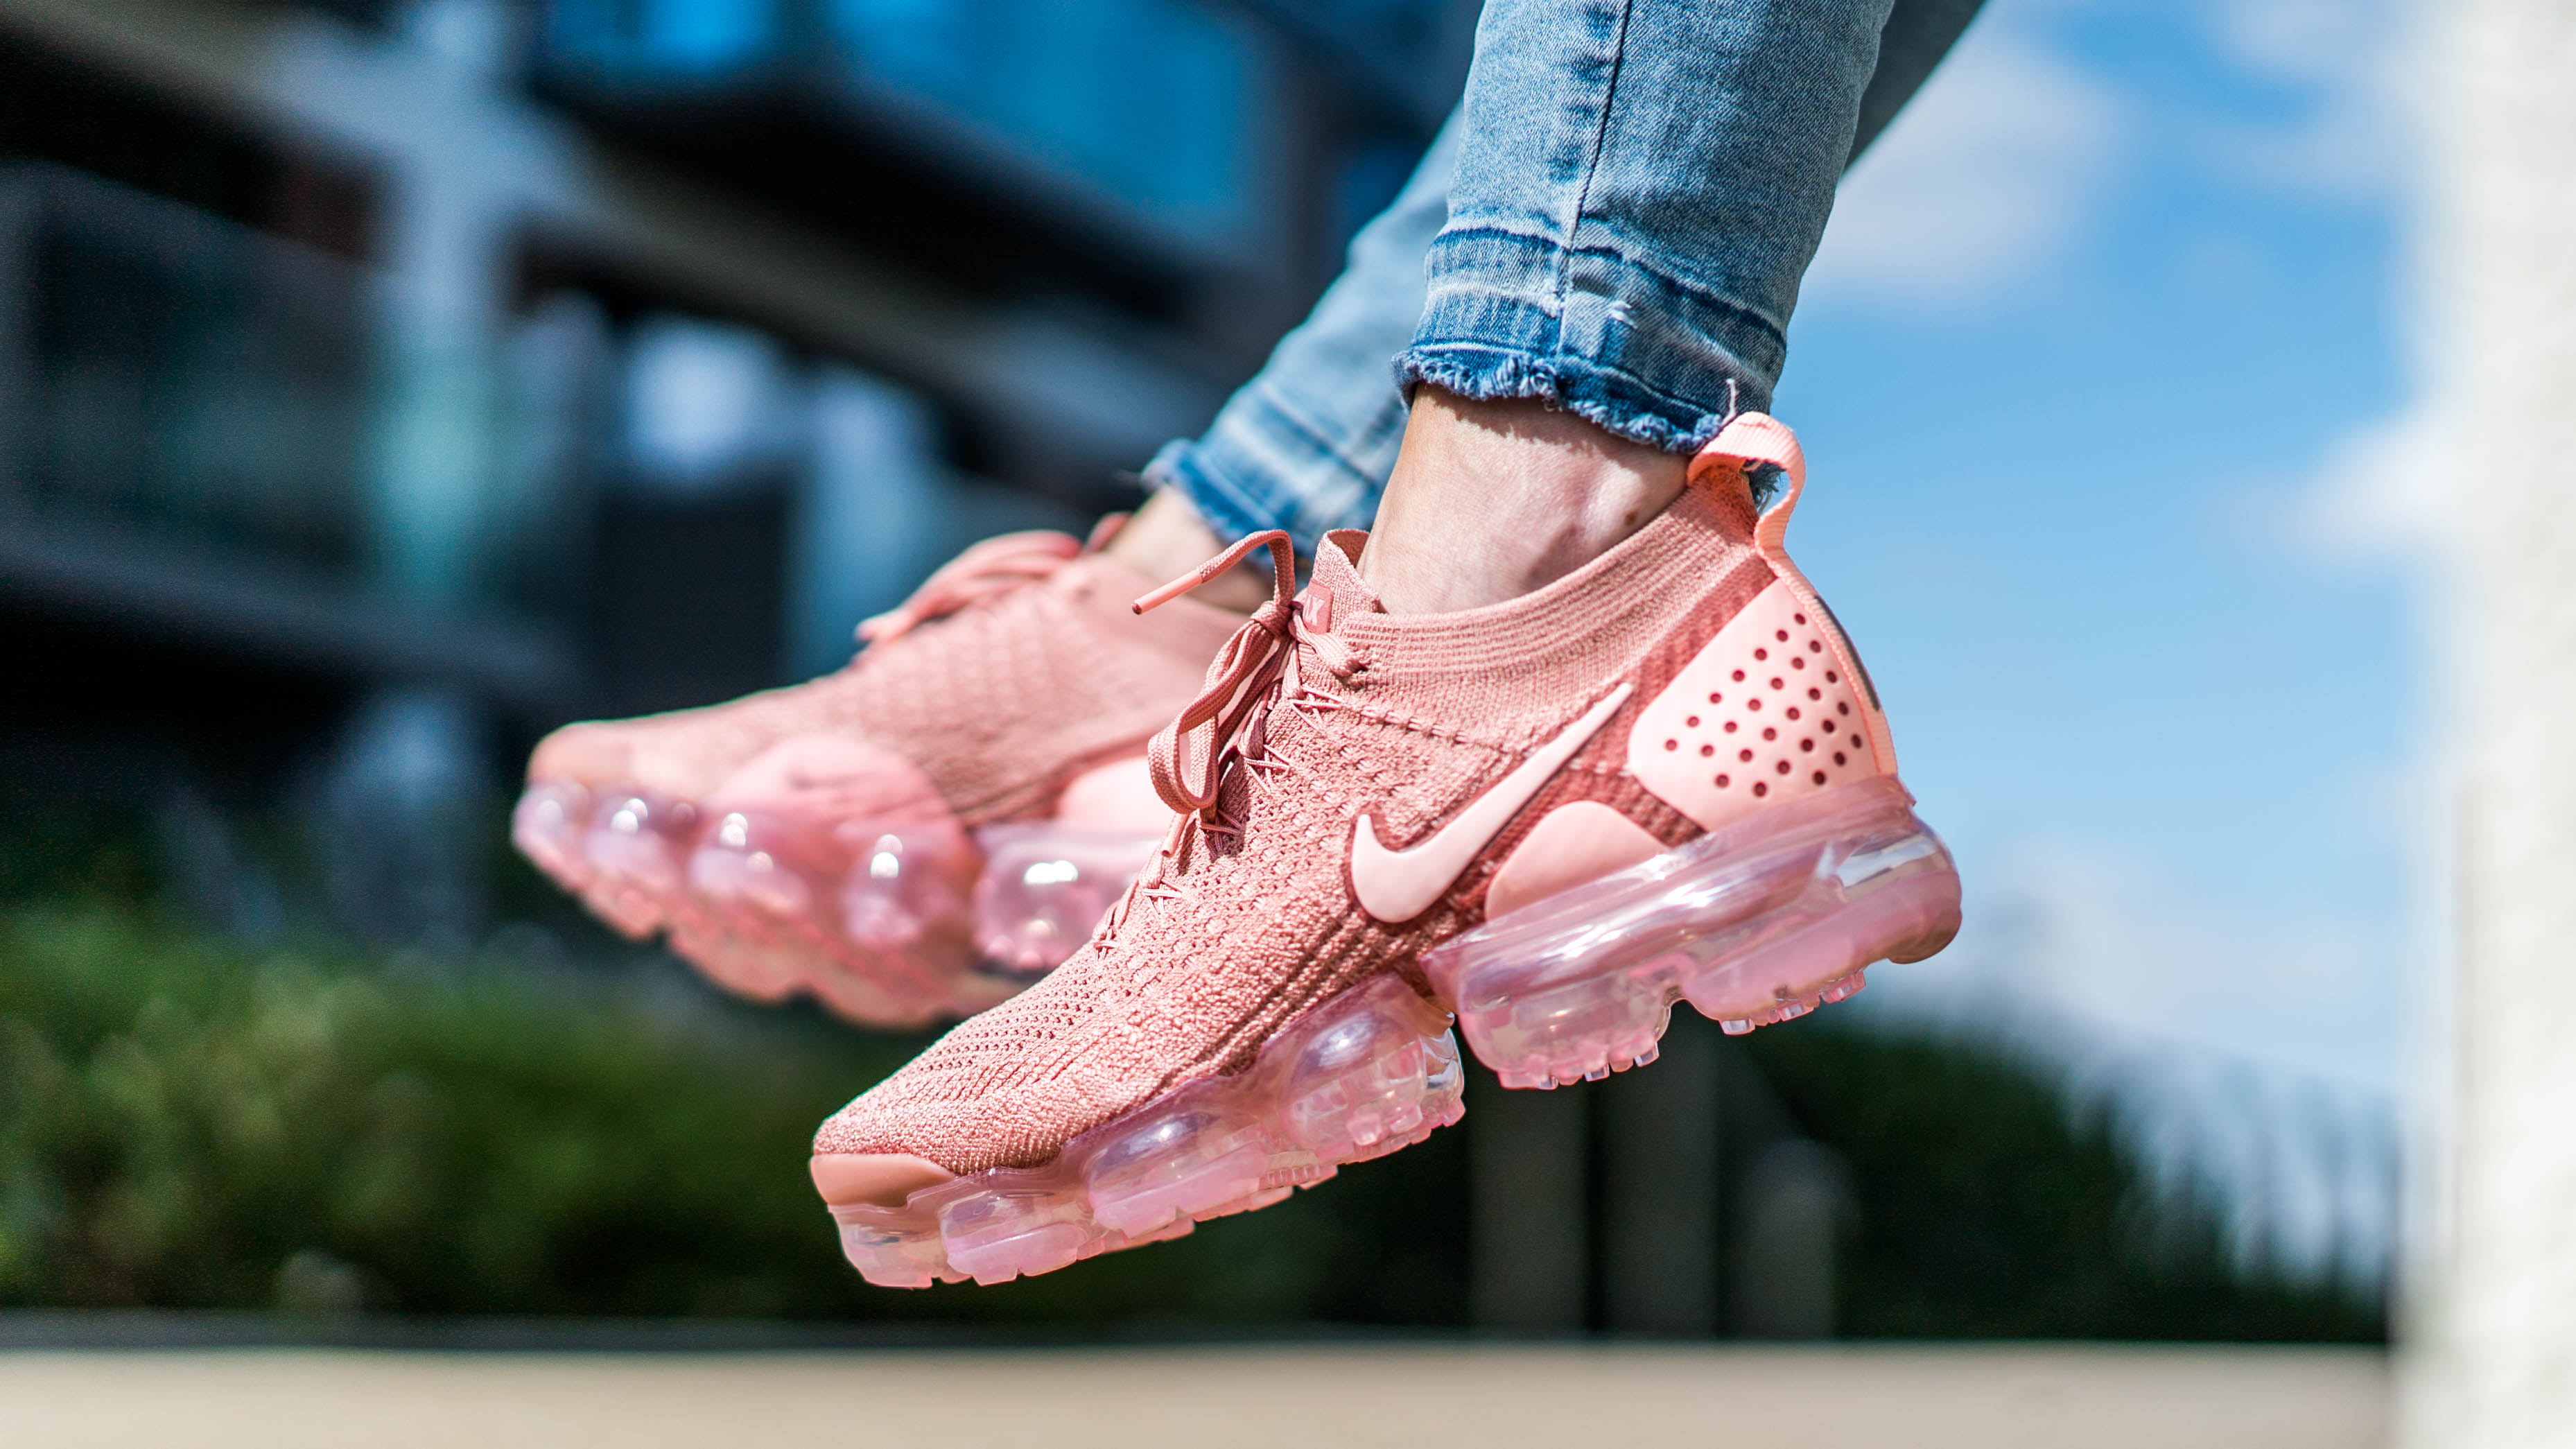 The Sole Womens al Exclusive On Foot Look At The Air VaporMax Flyknit 2 In Rust Pink 💕 https://t.co/6drRISHukU" / Twitter